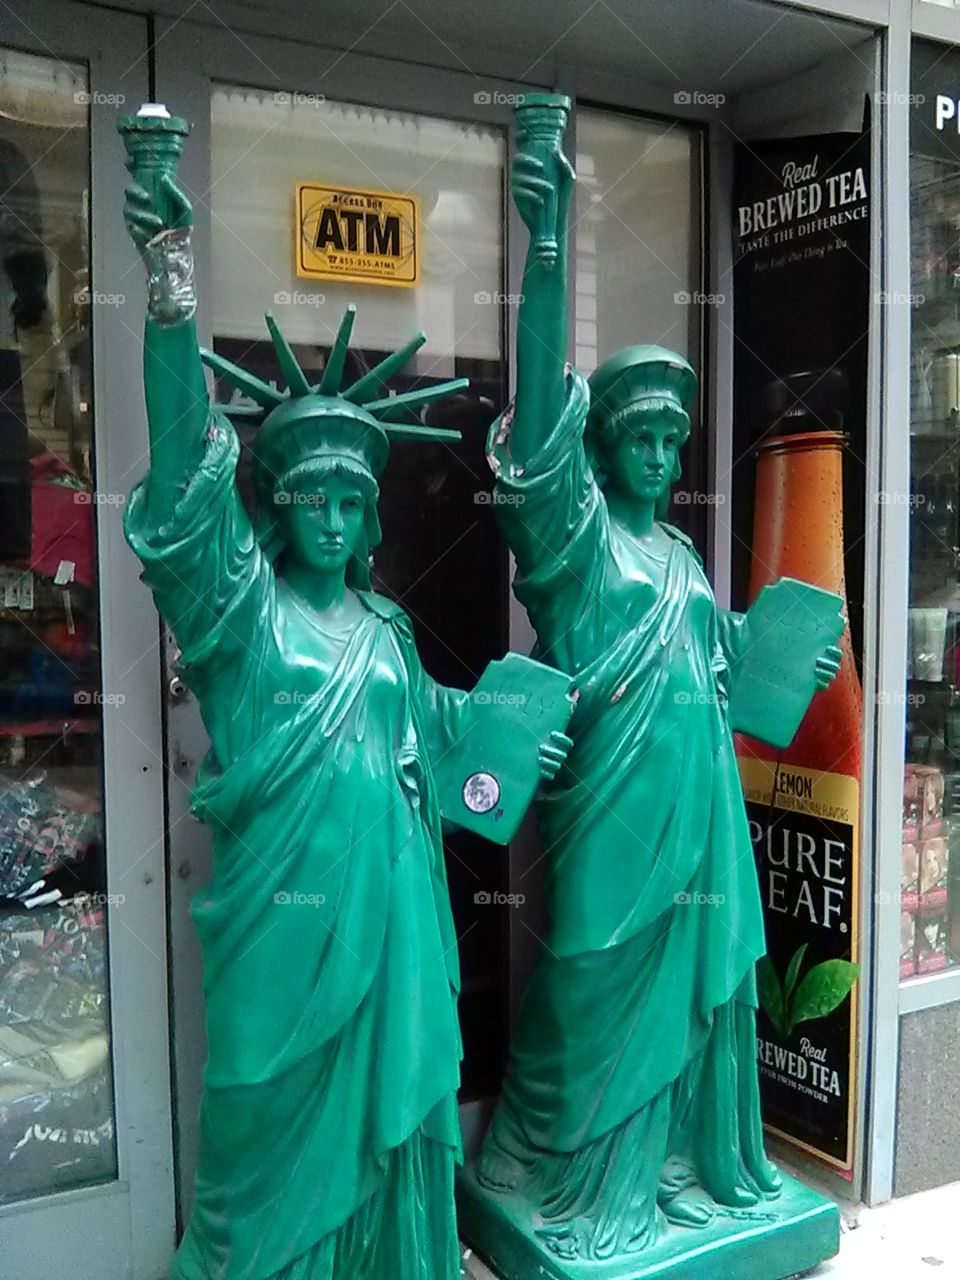 Double the amount of Liberty. ..Ps...still not your ATM...